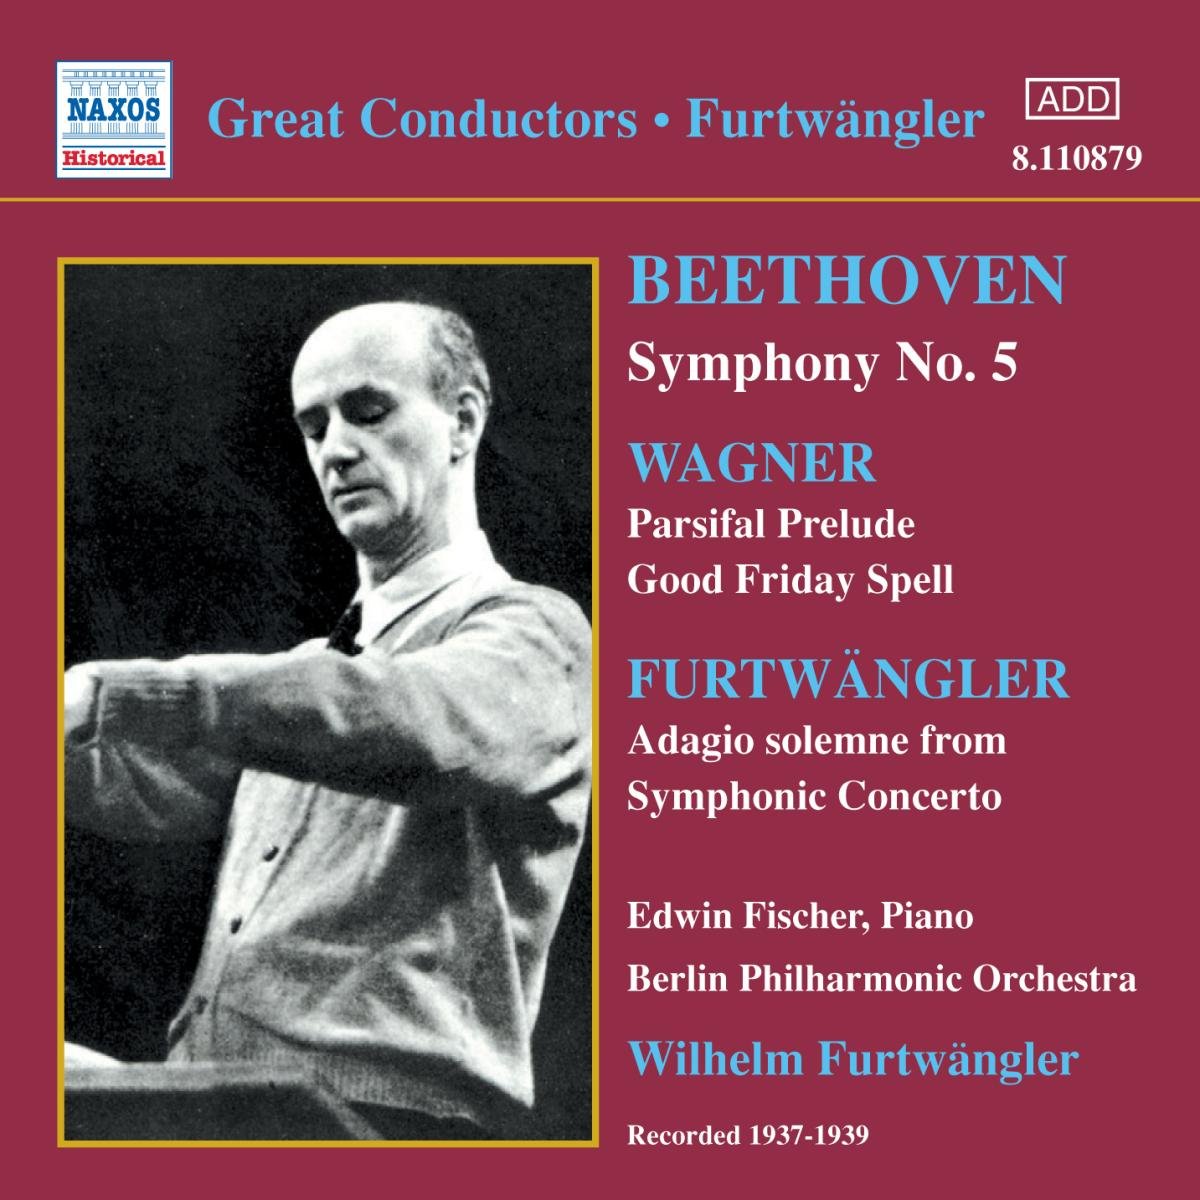 Beethoven: Symphony No 5 / Wagner: Parsifal Prelude and Good Friday Spell